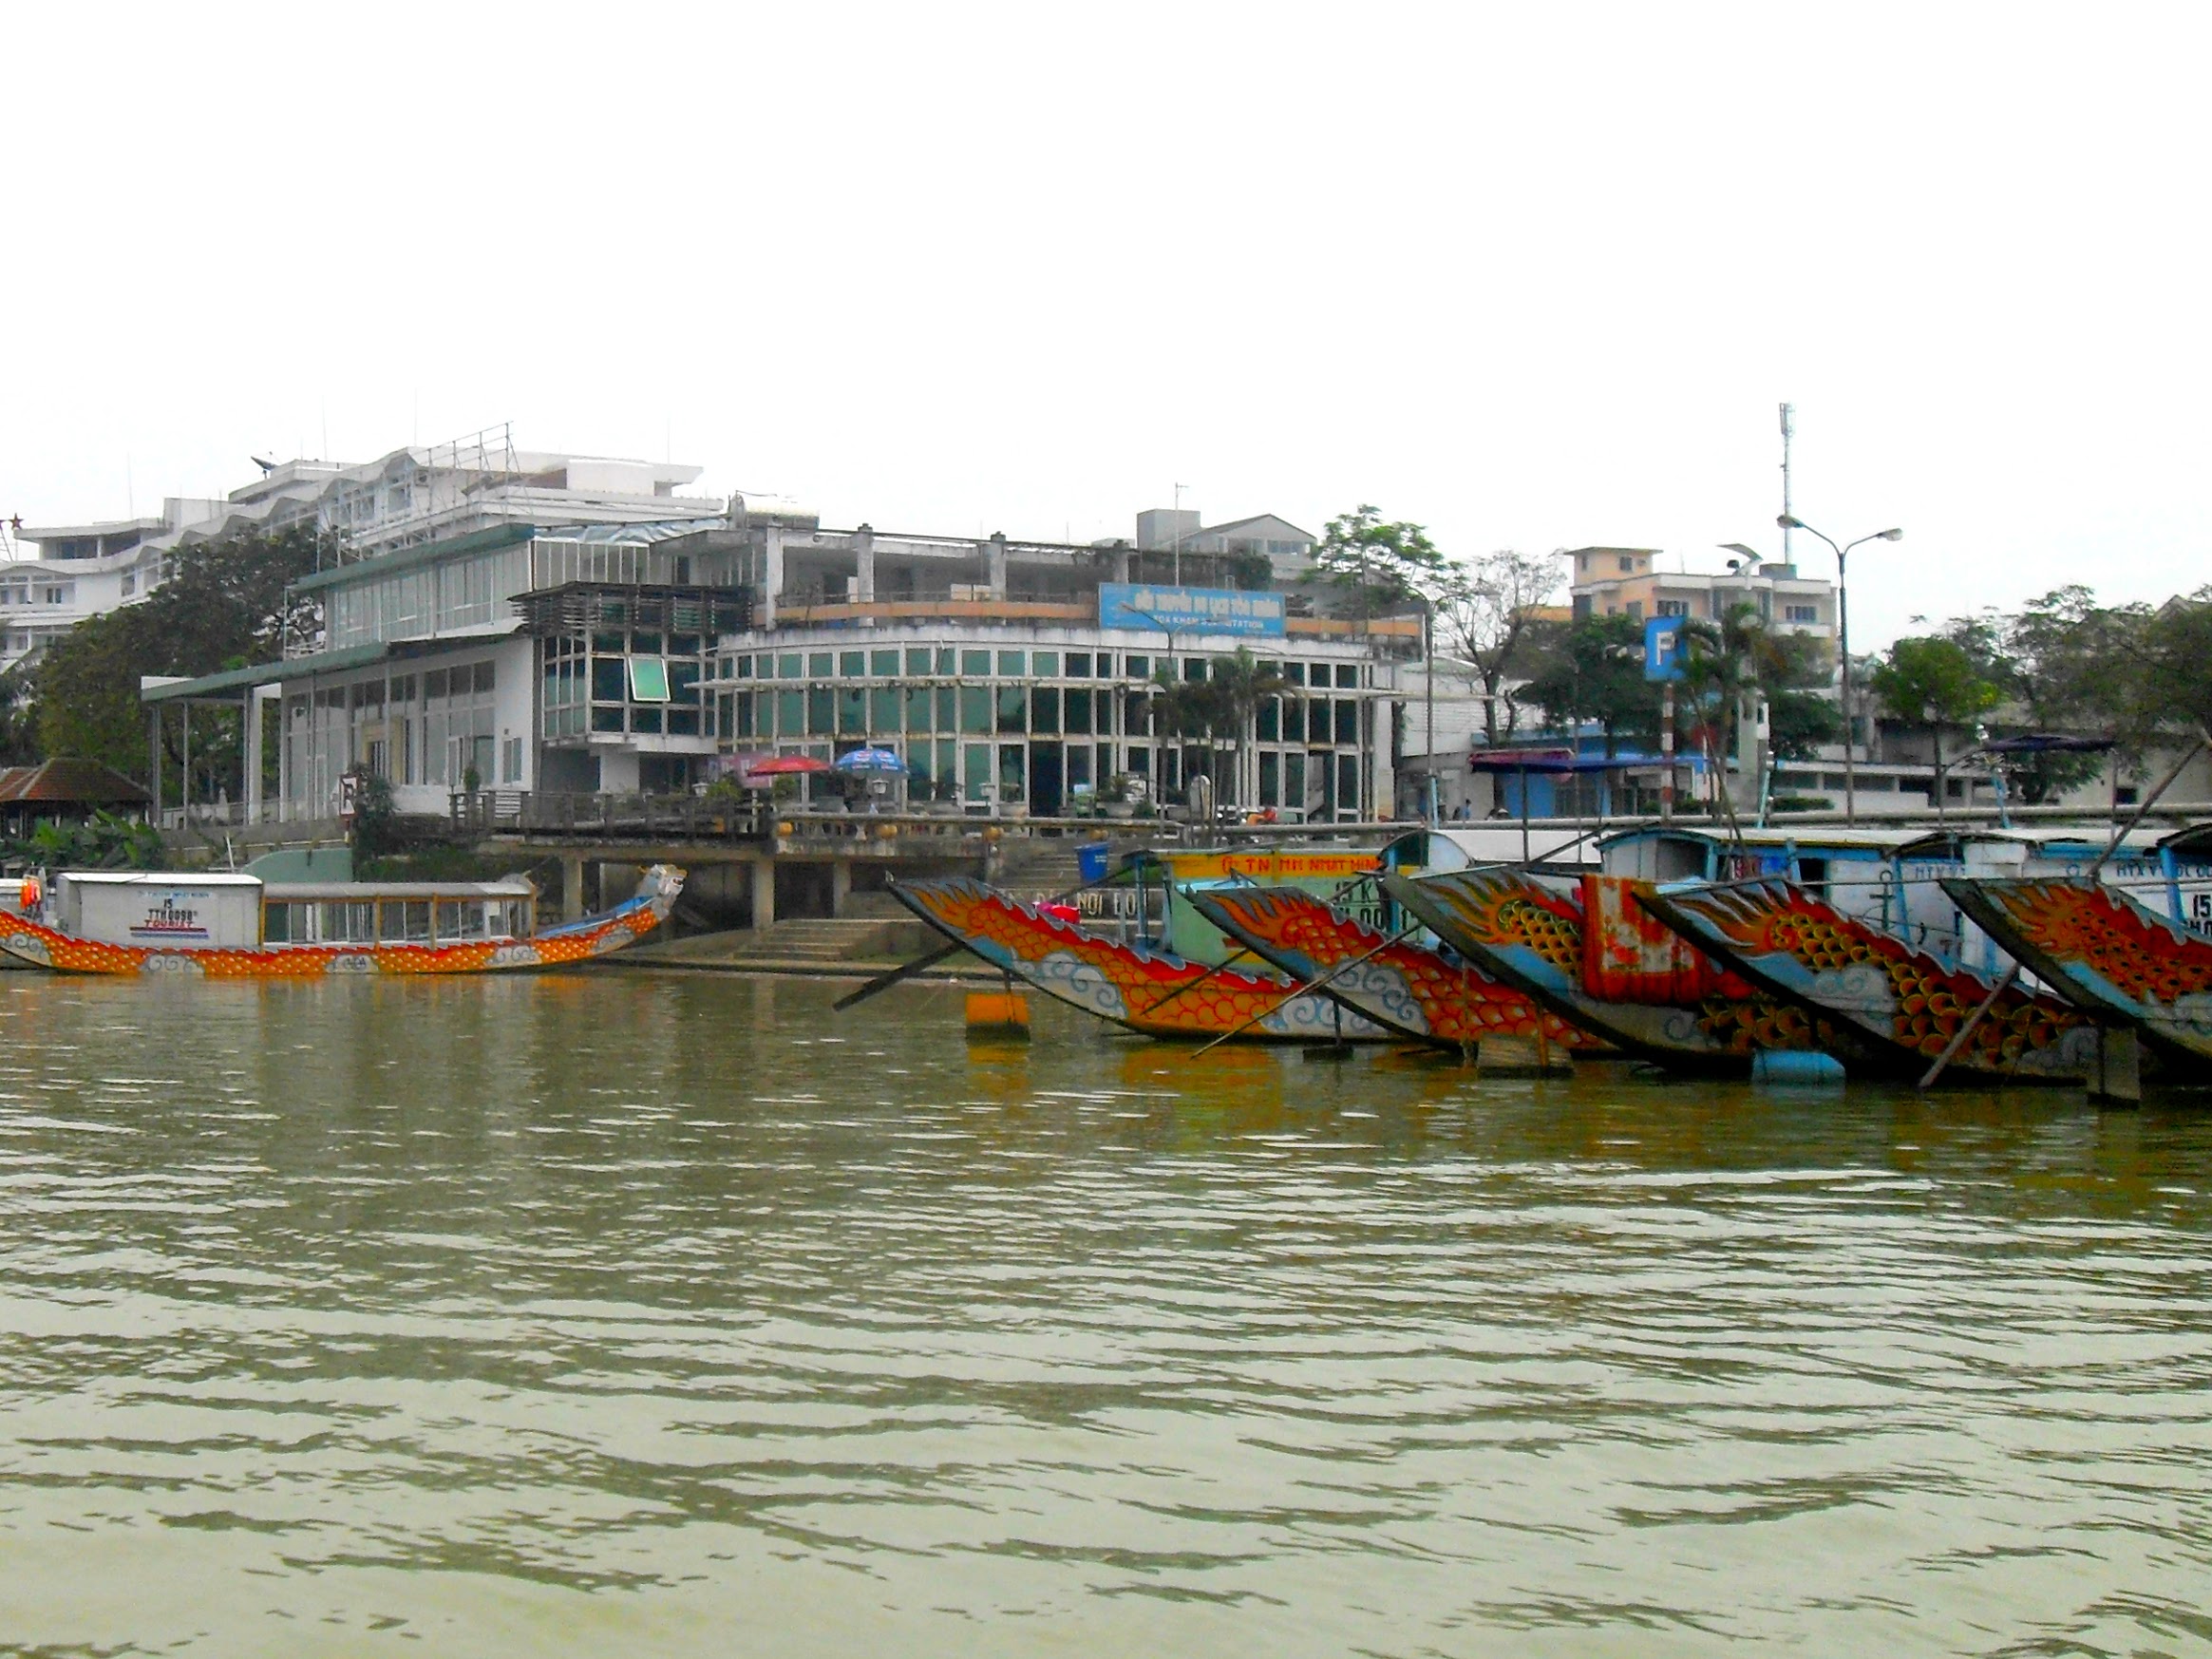 Boats on a river in Vietnam